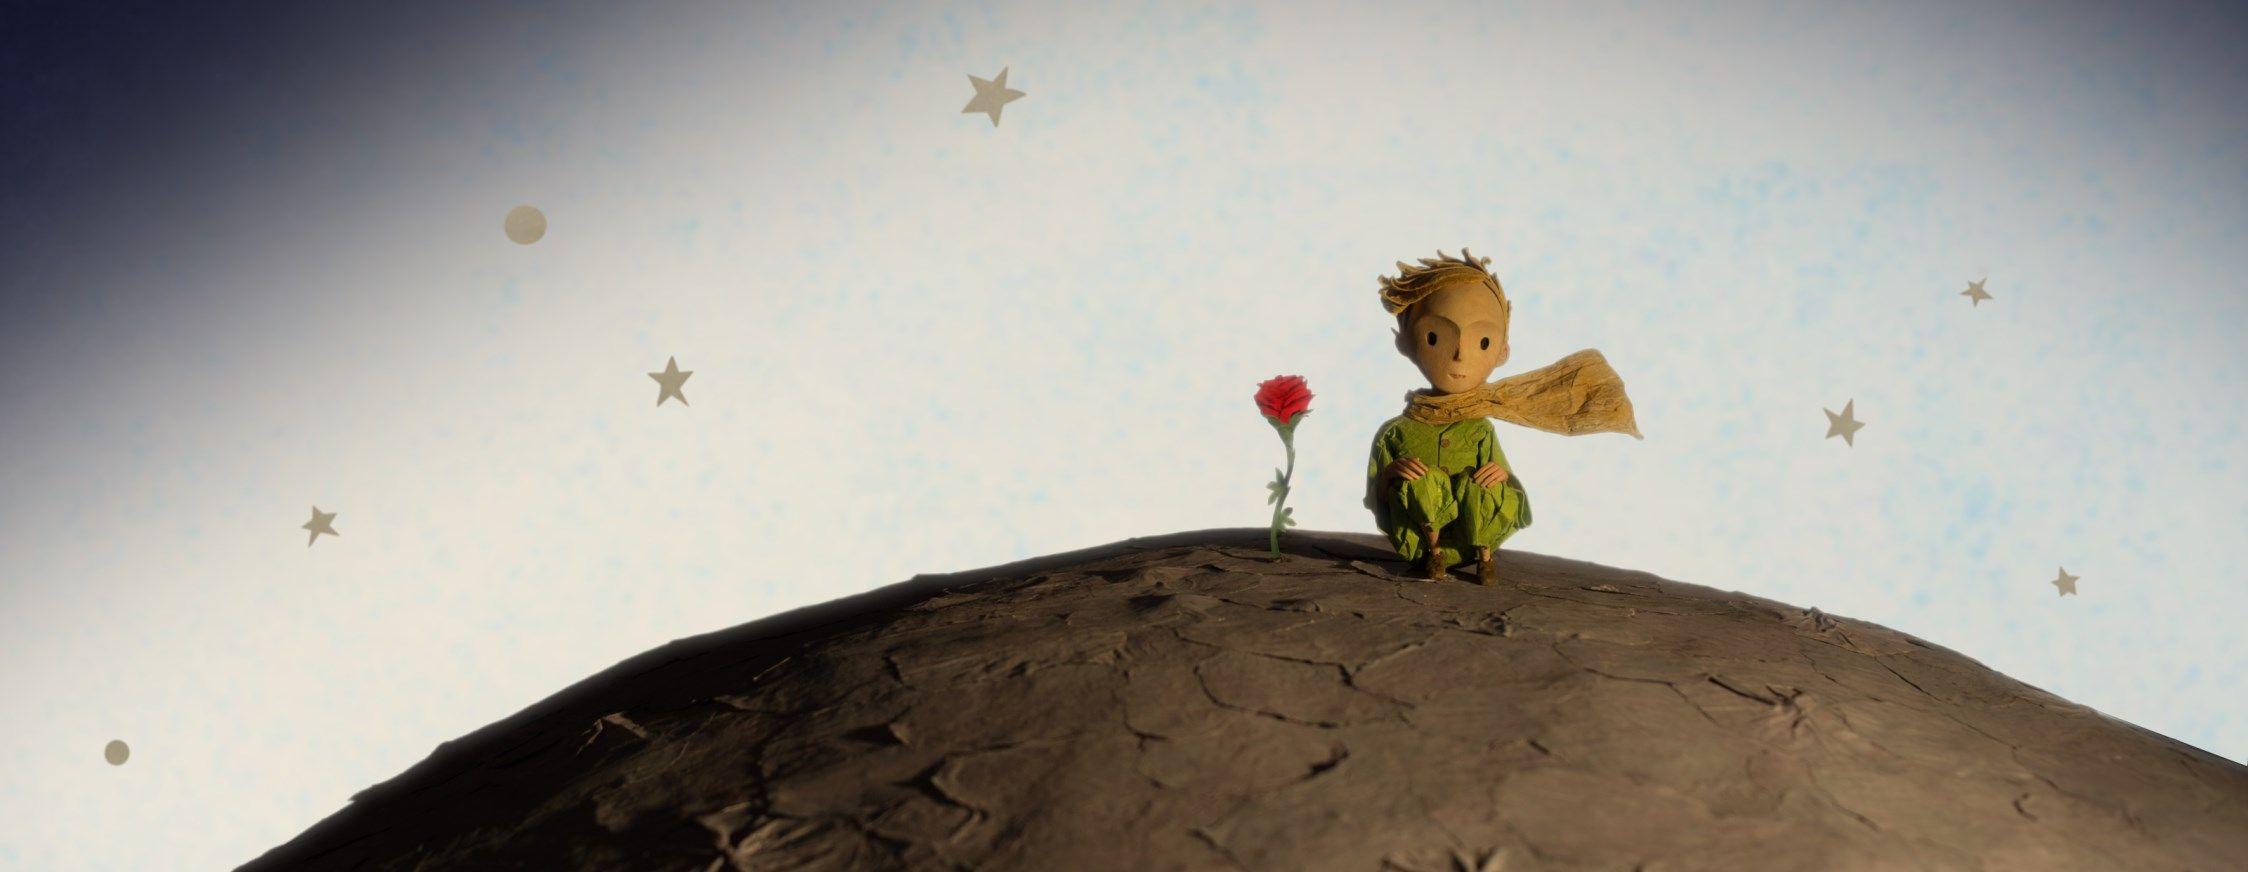 wallpaper free the little prince Download Awesome collection